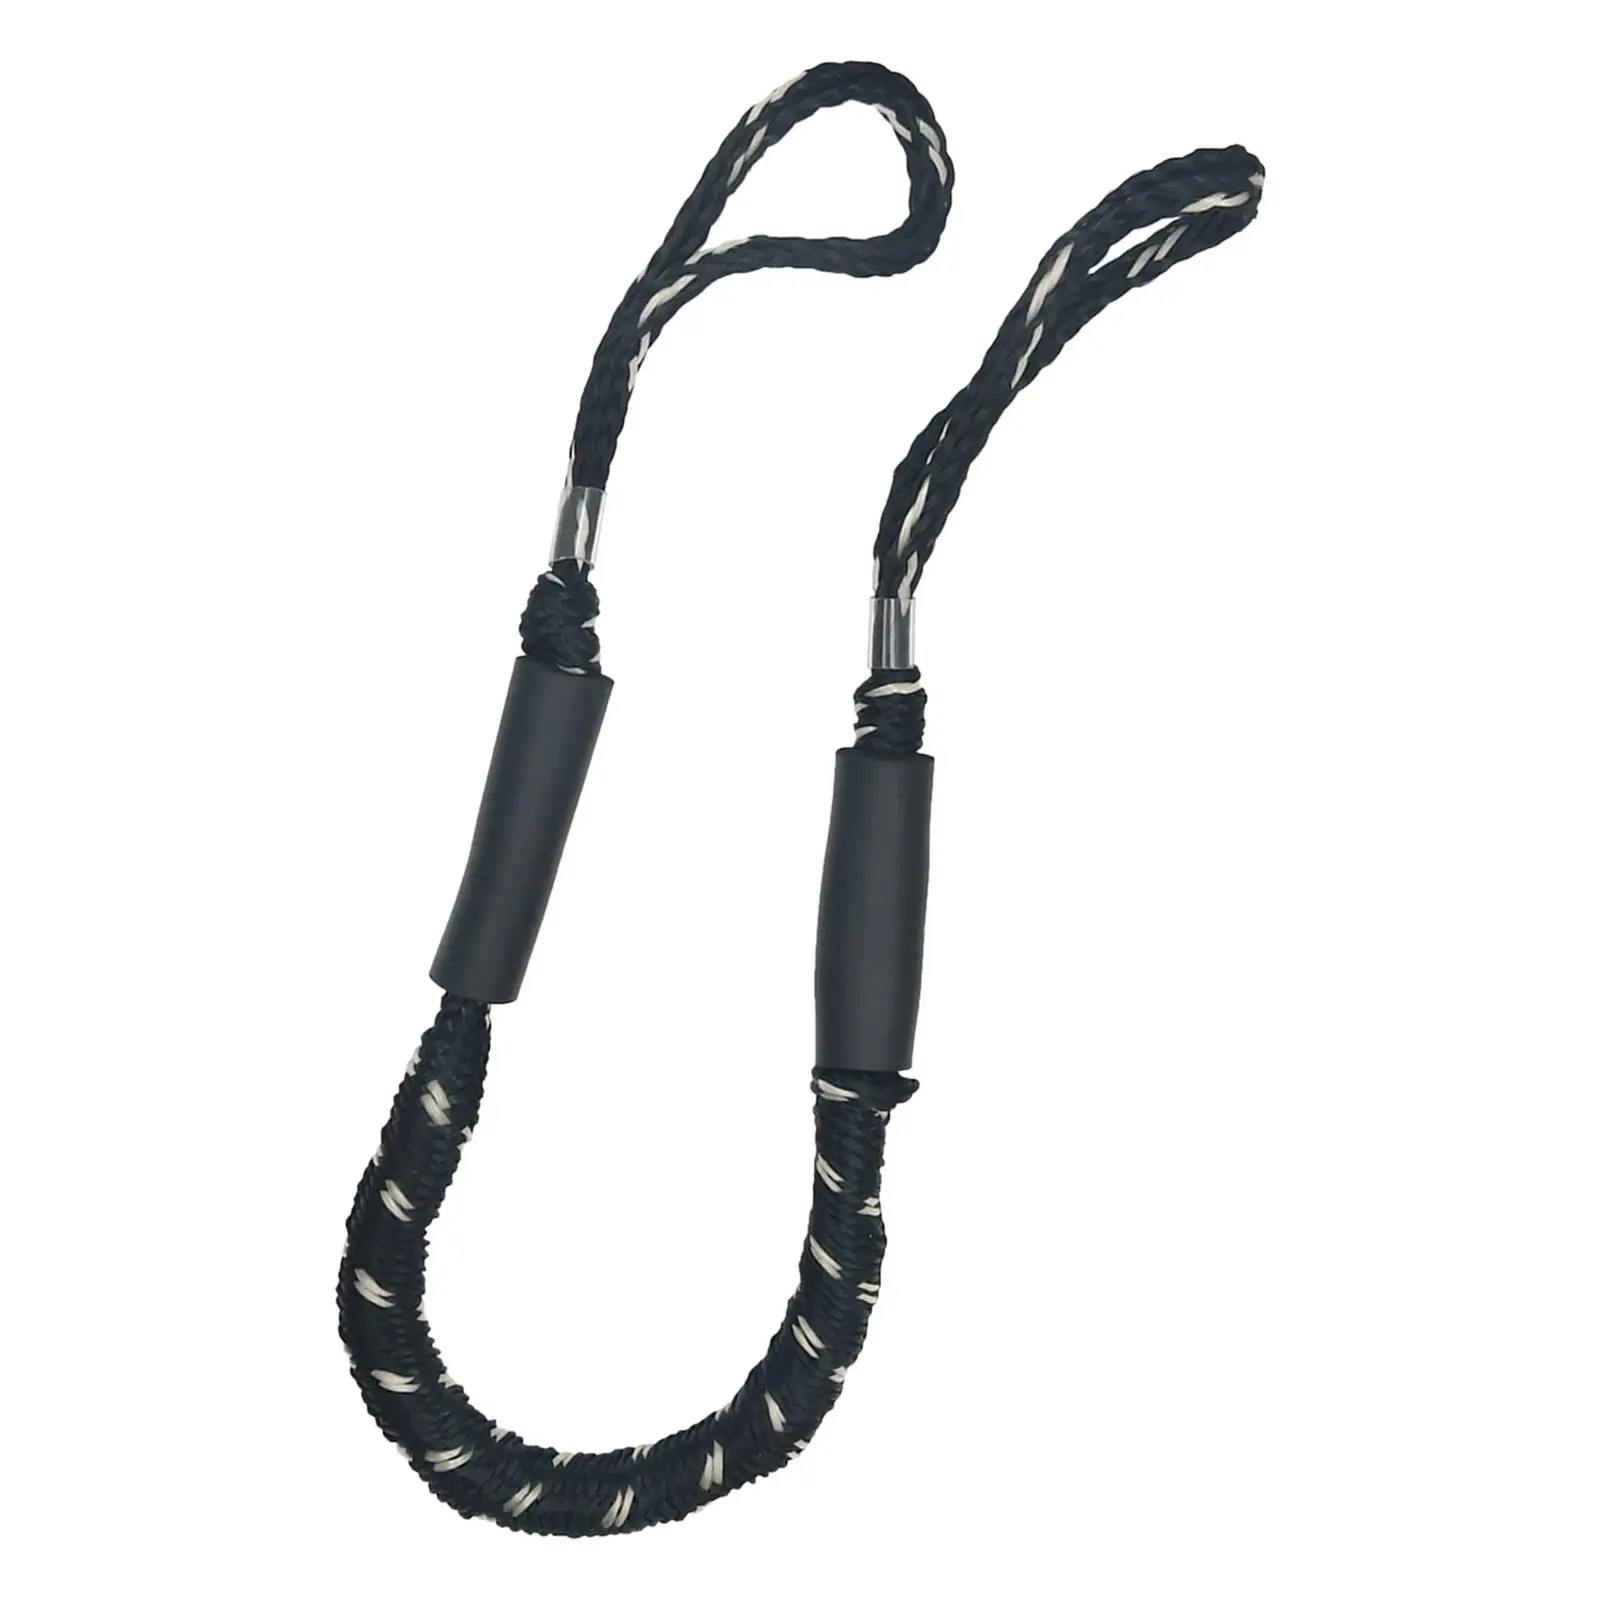 Bungee Dock Line Bungee Docking Rope 4FT Rope Stretchable Mooring Rope Foam Float Fishing Boats Kayak Accessories